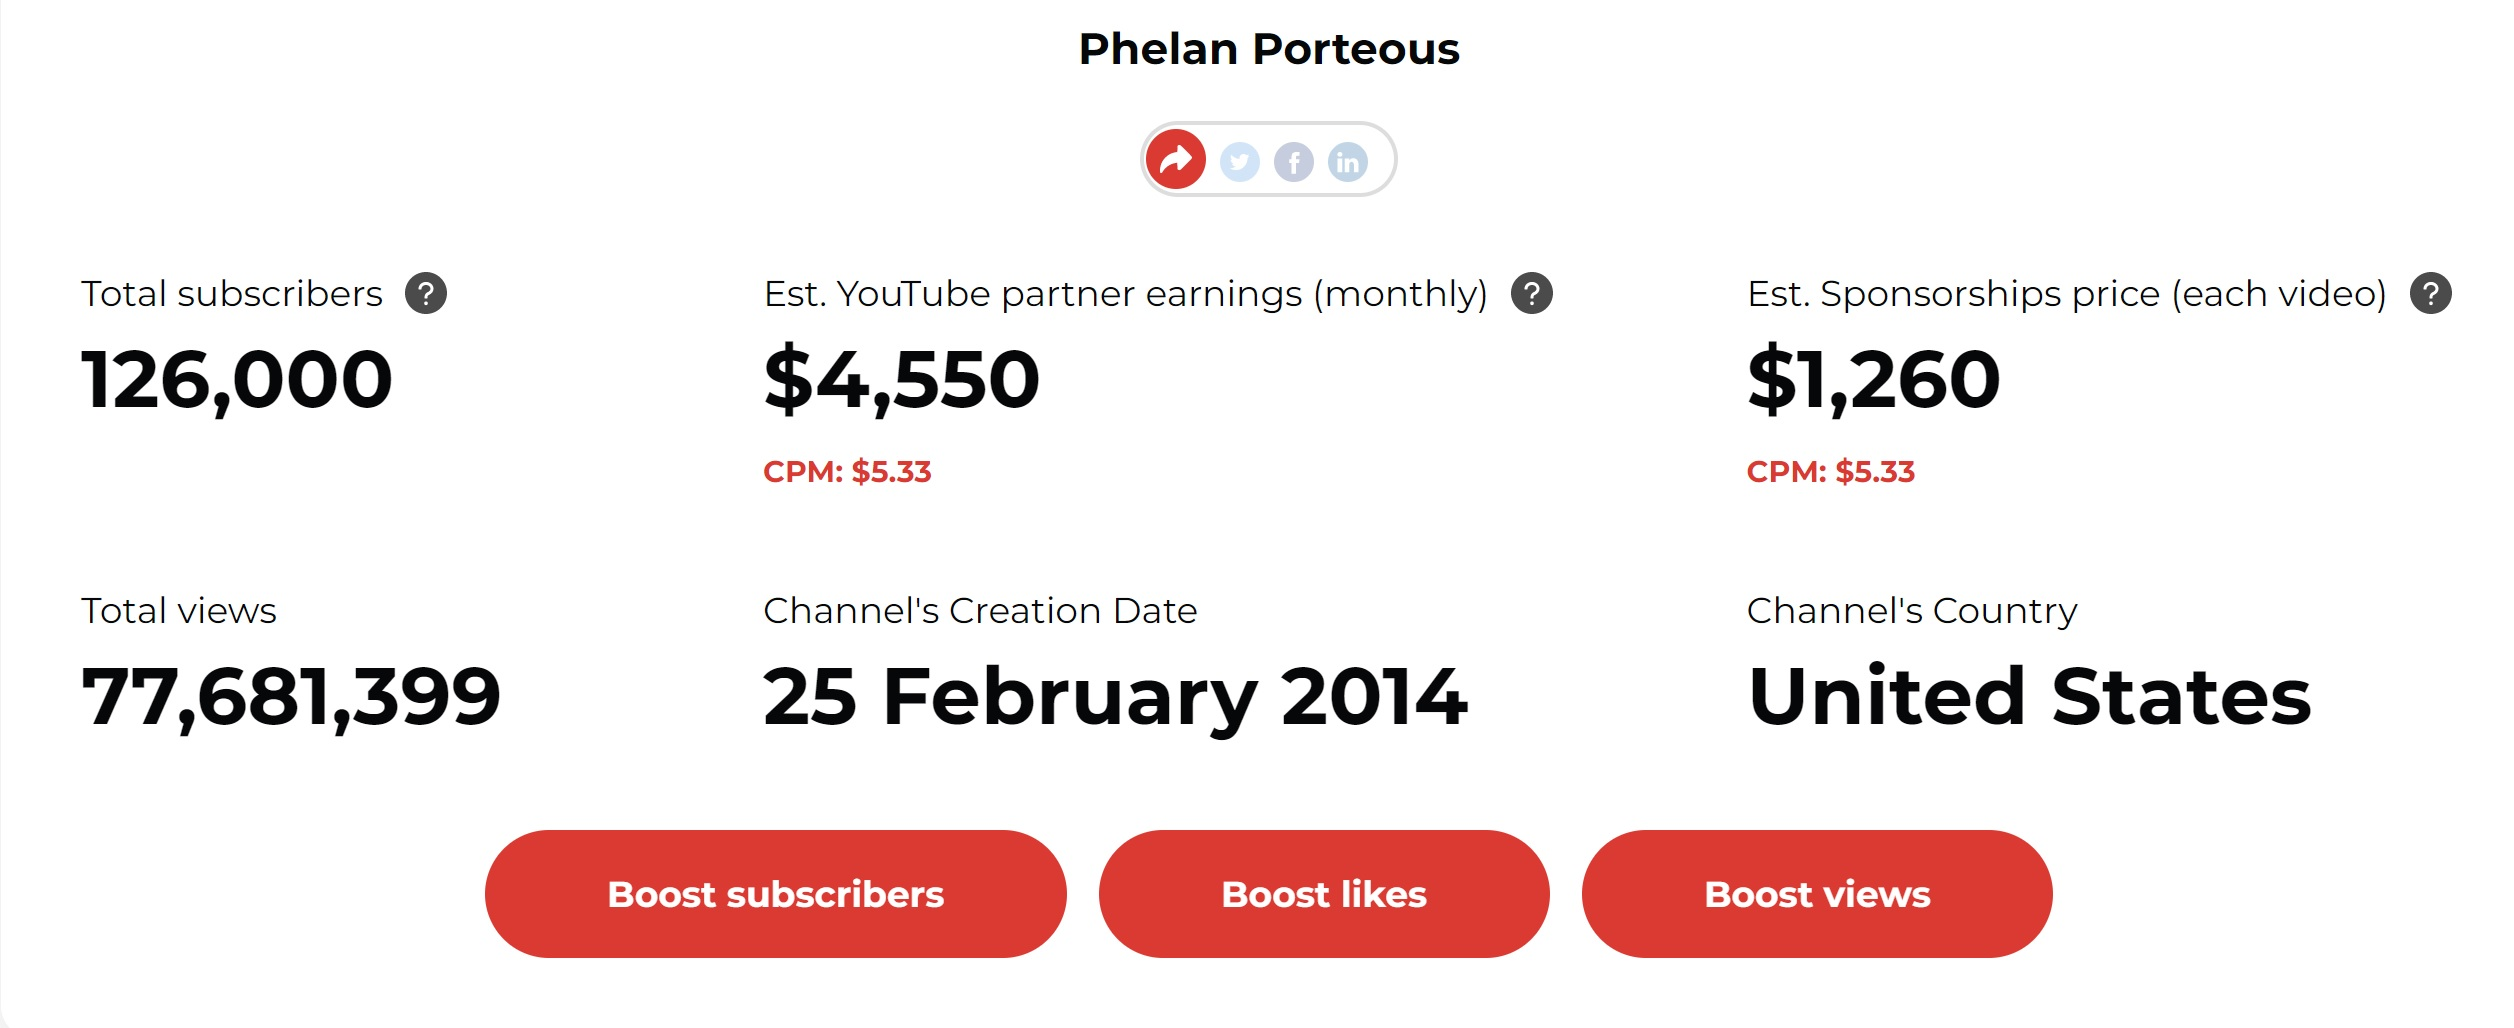 Phelan Porteous YouTube channel views and earnings